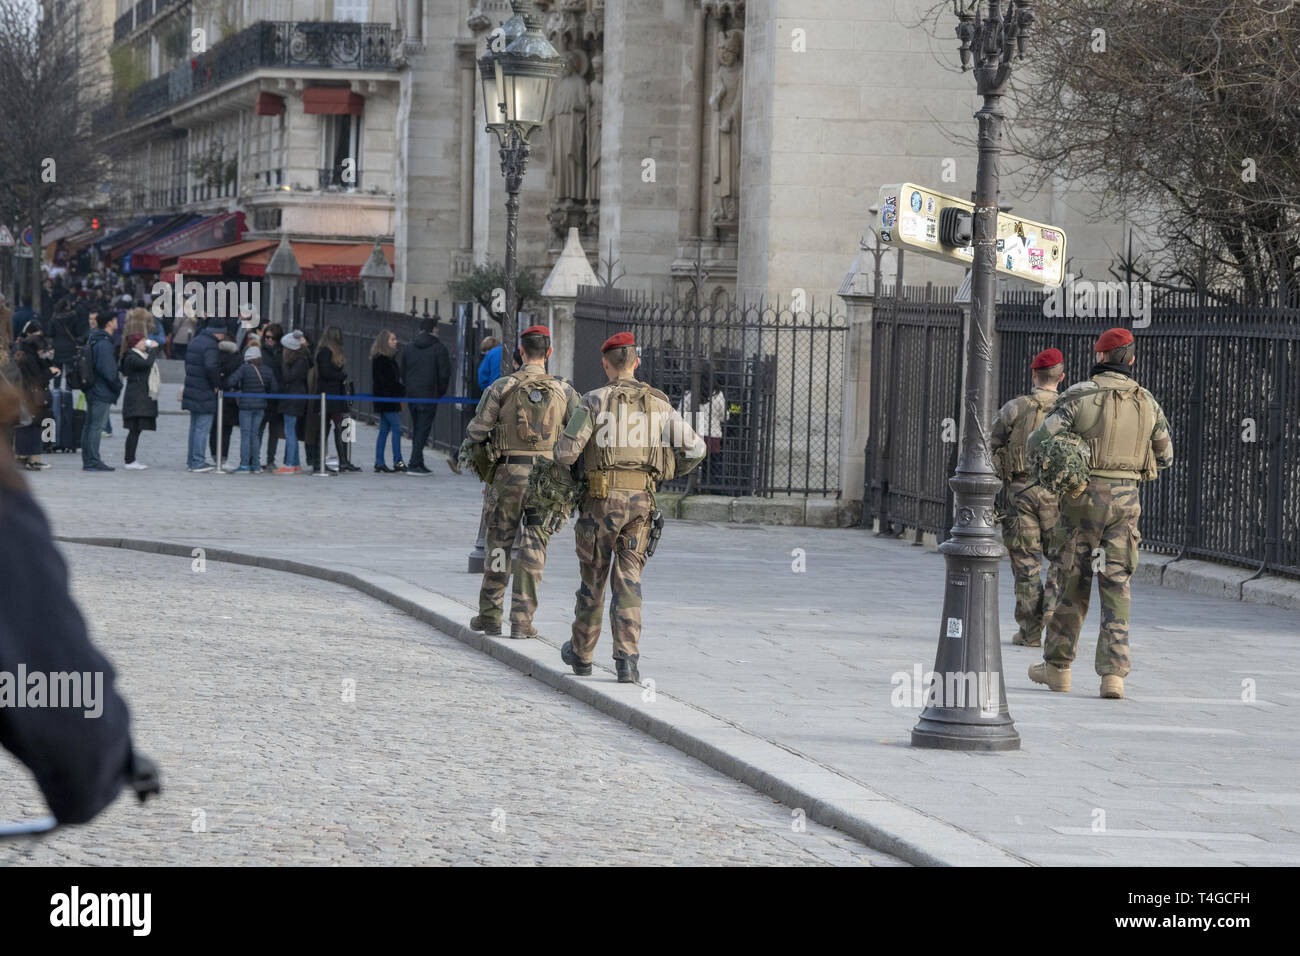 Military personnel patrolling the entrance of Notre Dame de Paris, as part of the Plan Vigipirate ,  France's national security alert system. Stock Photo